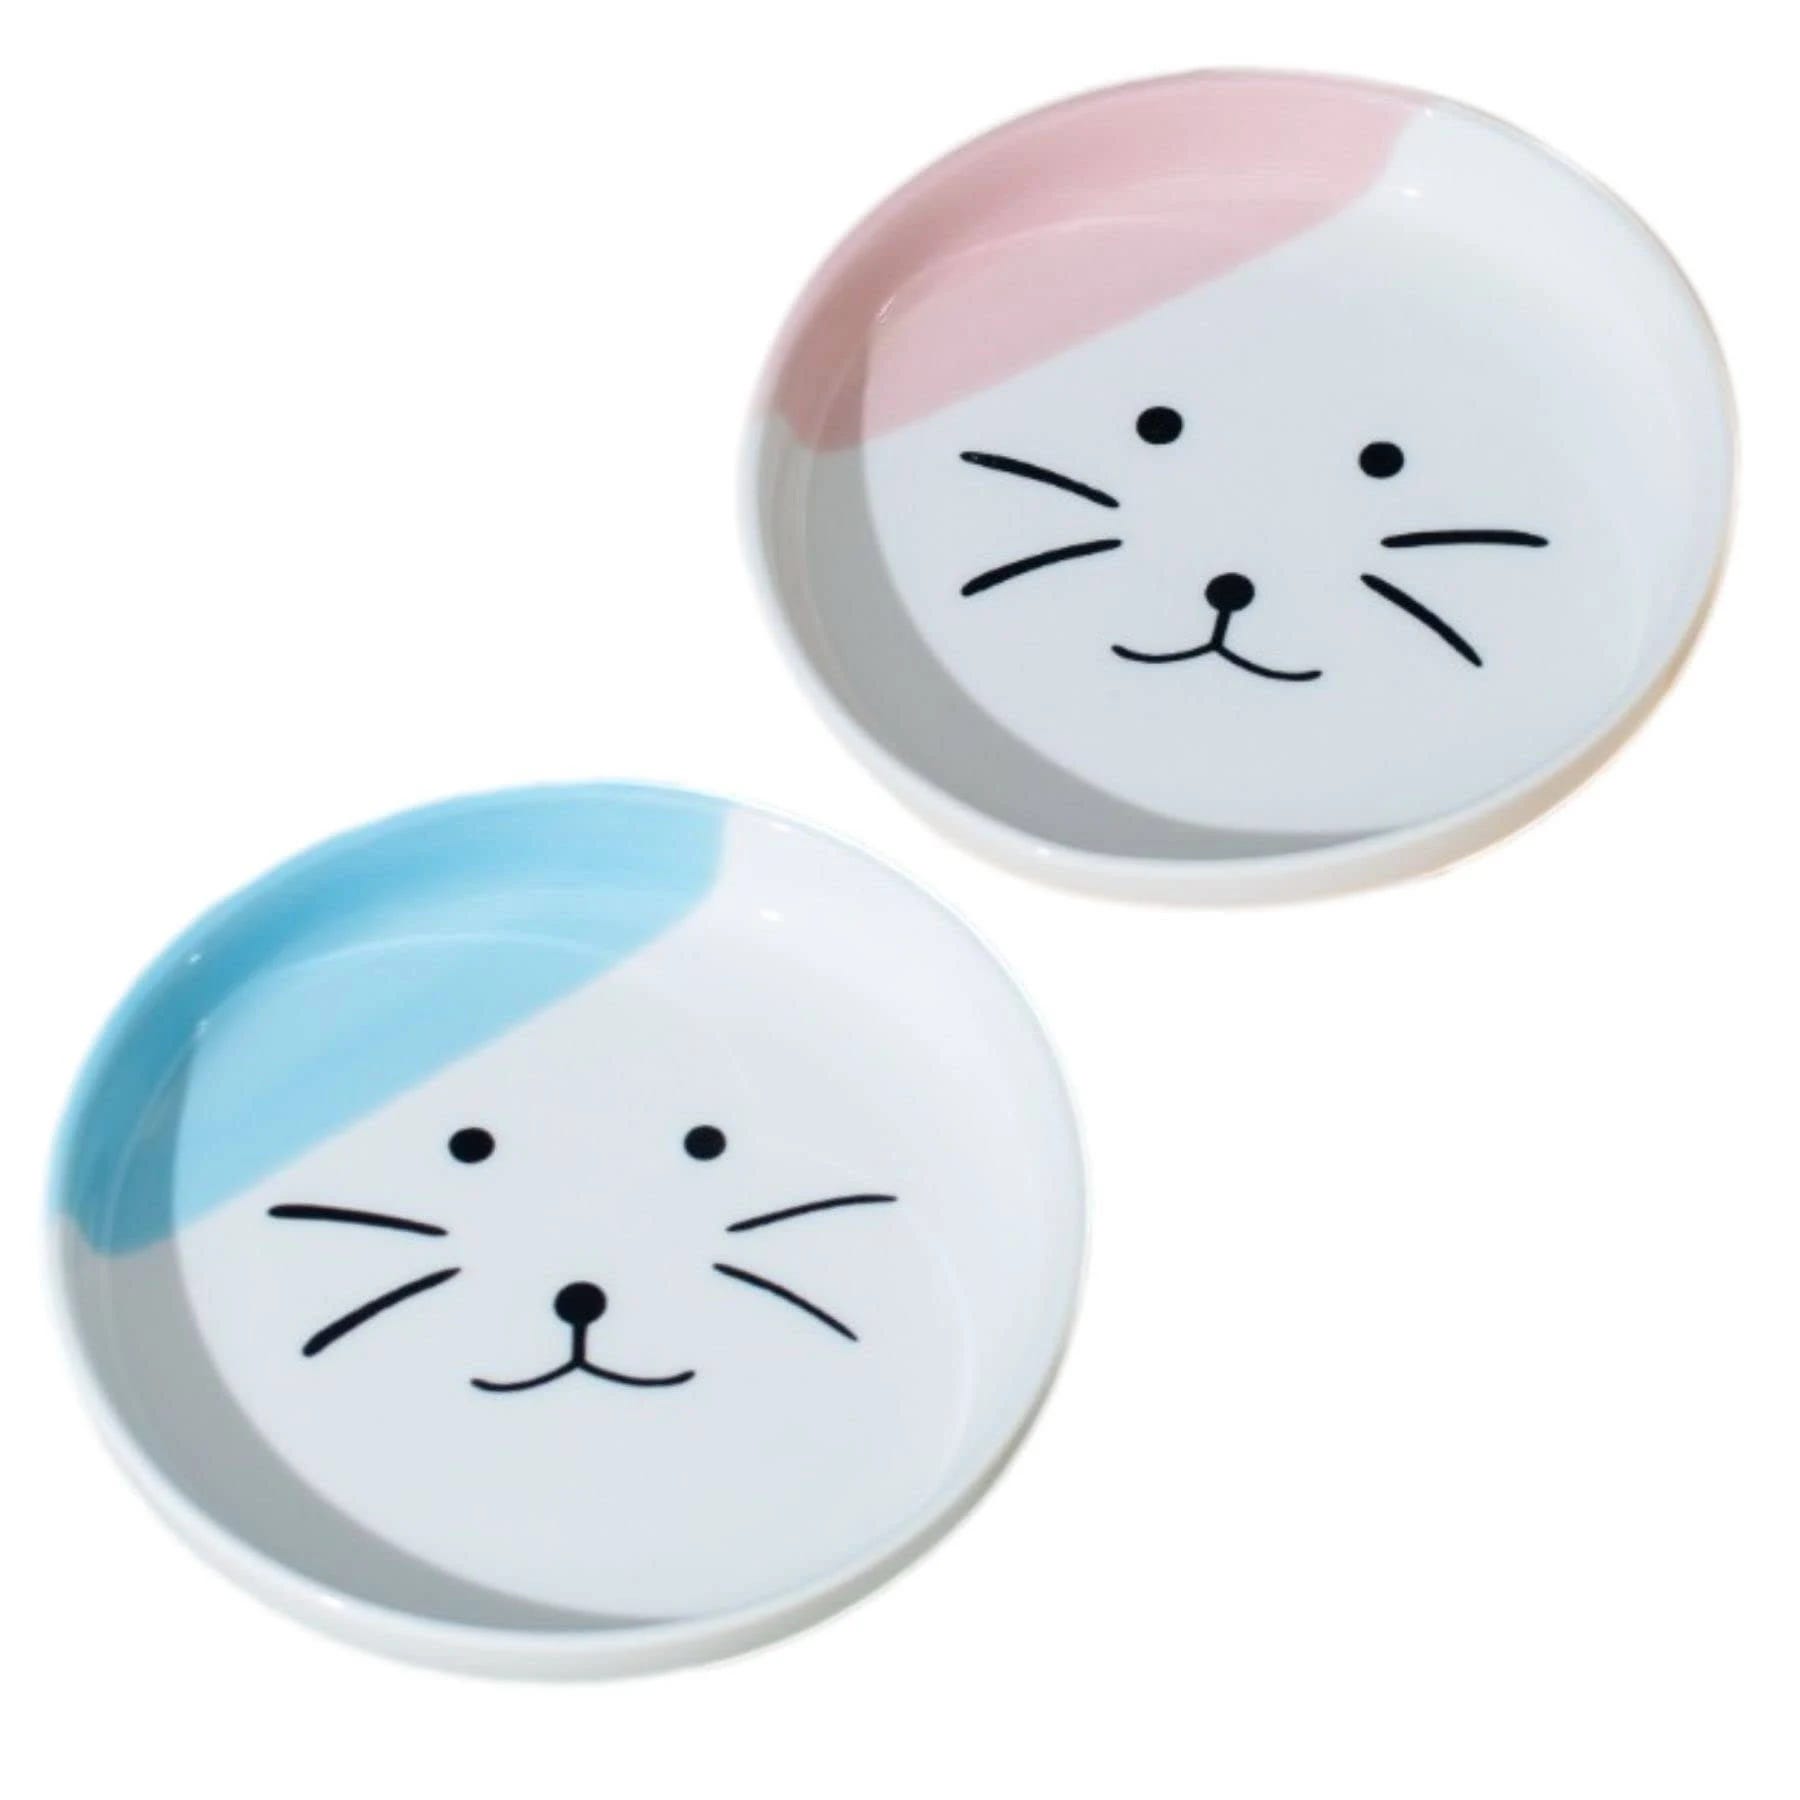 Ceramic Shallow Cat Food Wide Plate for Whisker Fatigue Relief | Image